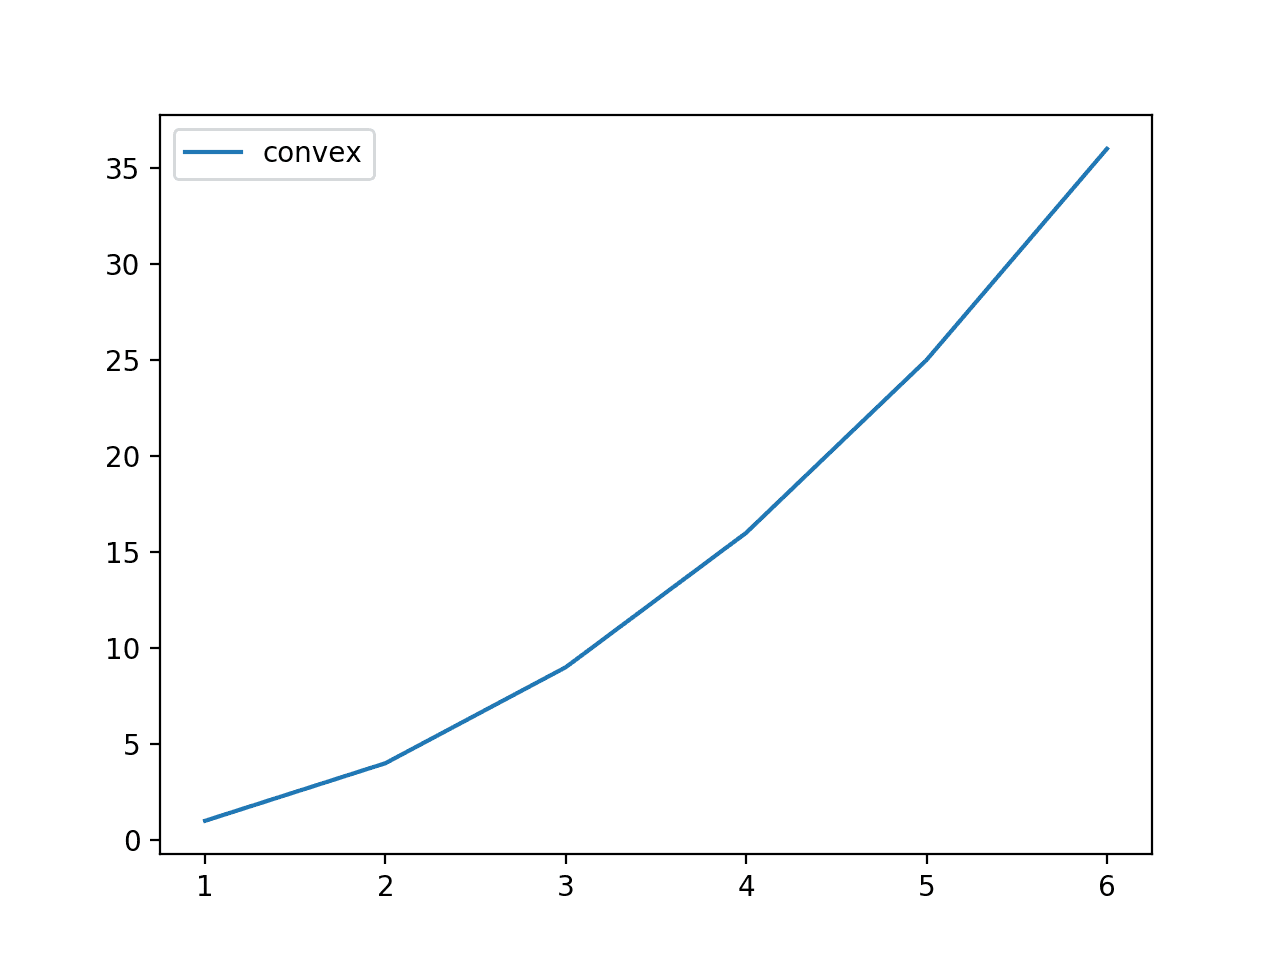 Line Plot of Dice Roll Outcomes vs. Convex Payoff Function